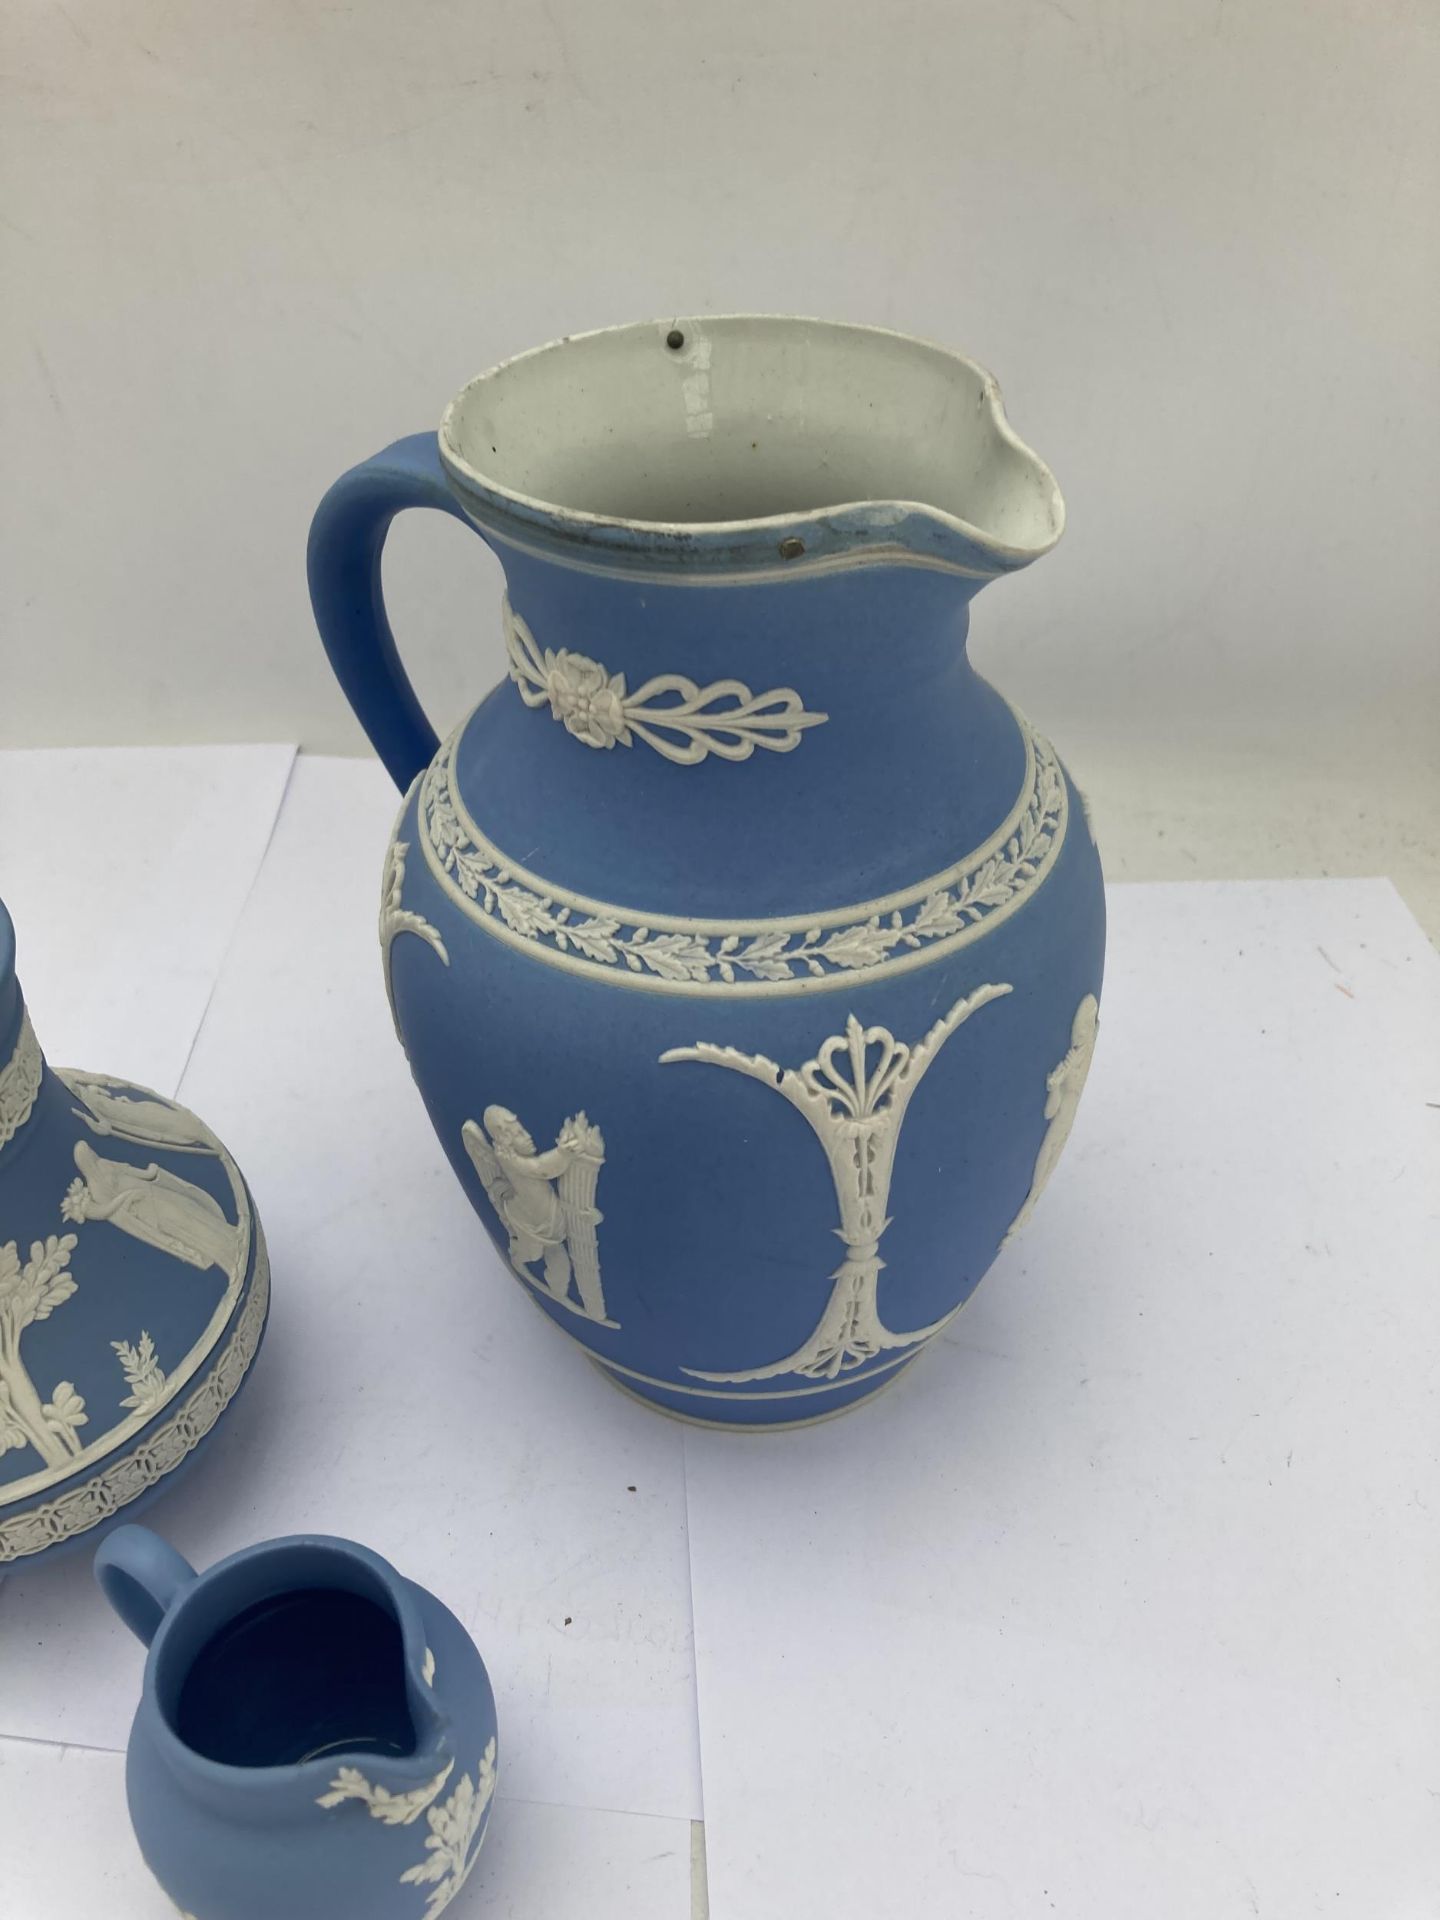 A GROUP OF THREE JASPERWARE ITEMS - TWO WEDGWOOD JUGS AND FURTHER JUG - Image 2 of 4